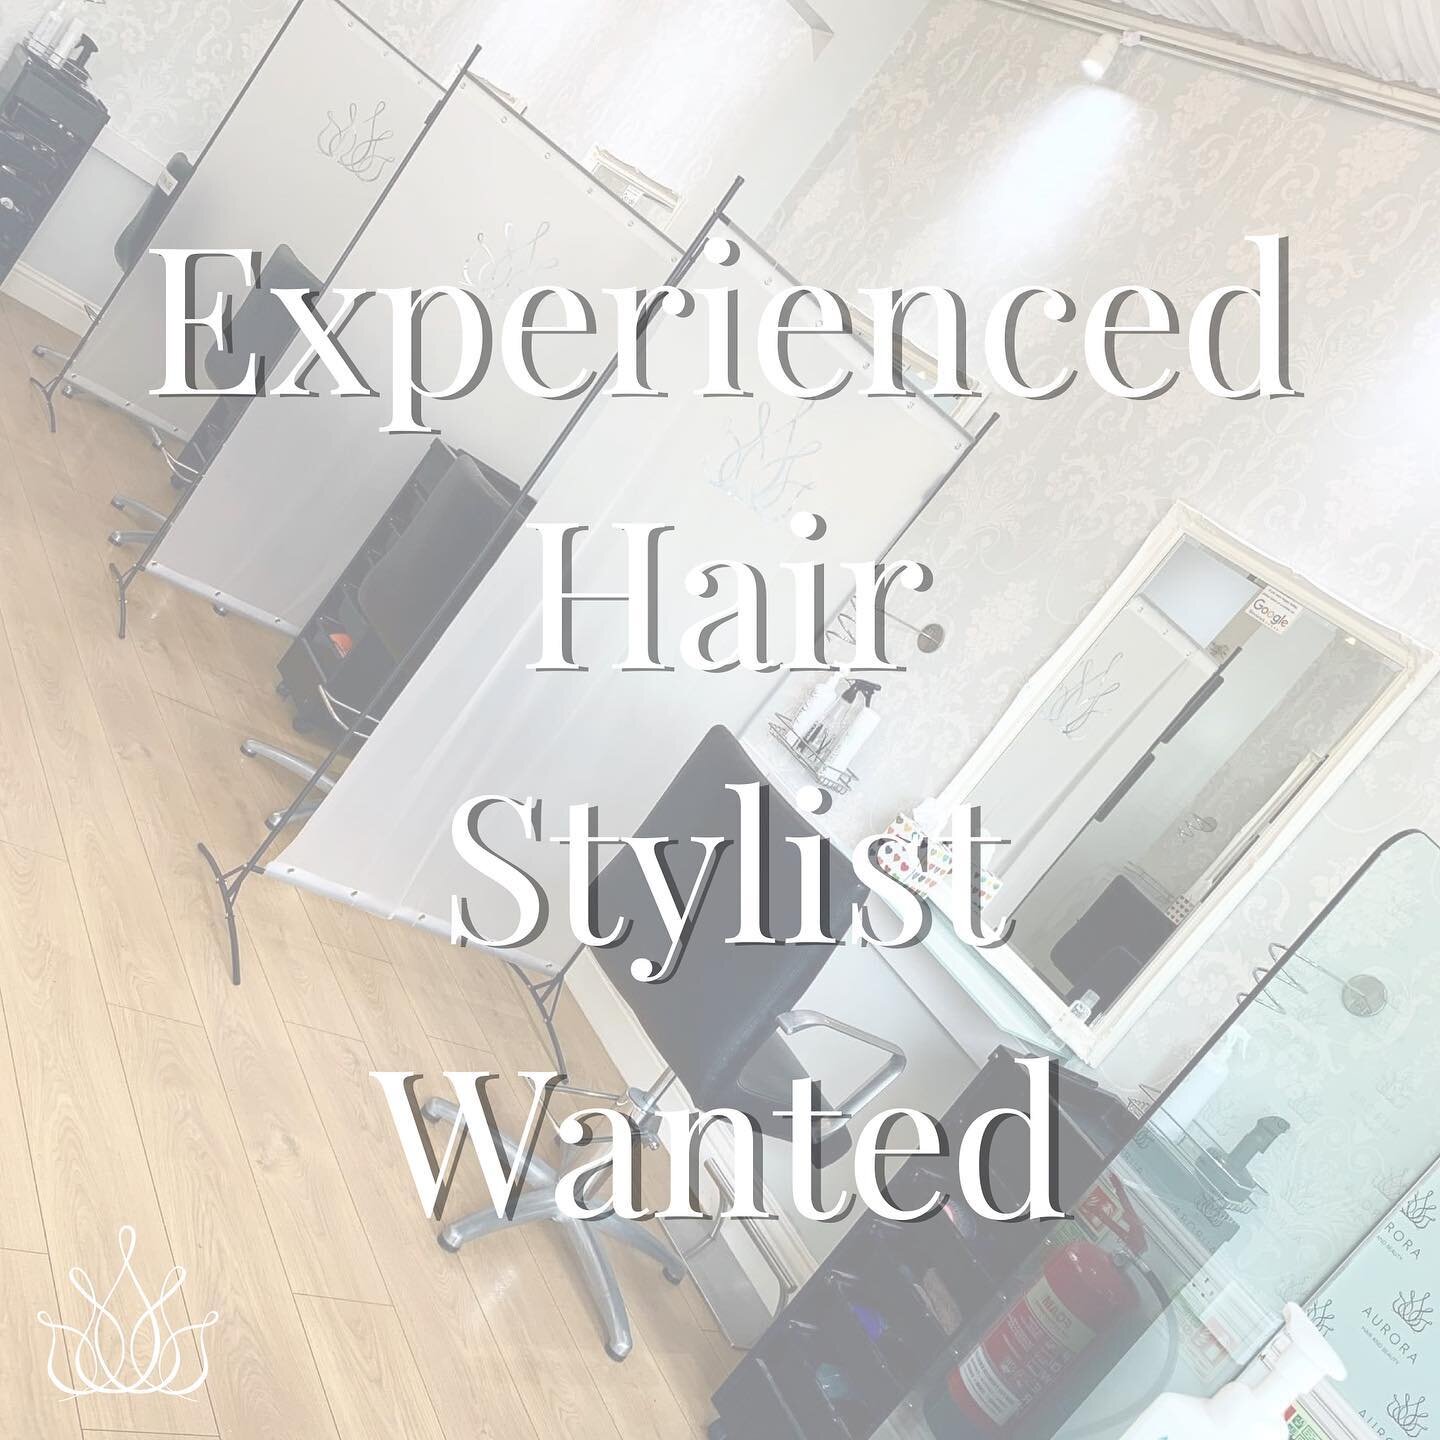 We are currently looking for an experienced Hair Stylist to join our team in our Benfleet based Salon. 
Please share and tag anyone you might think could be interested 😄

Please email a cv to stacie@aurorasalon.co.uk or to request more information 
